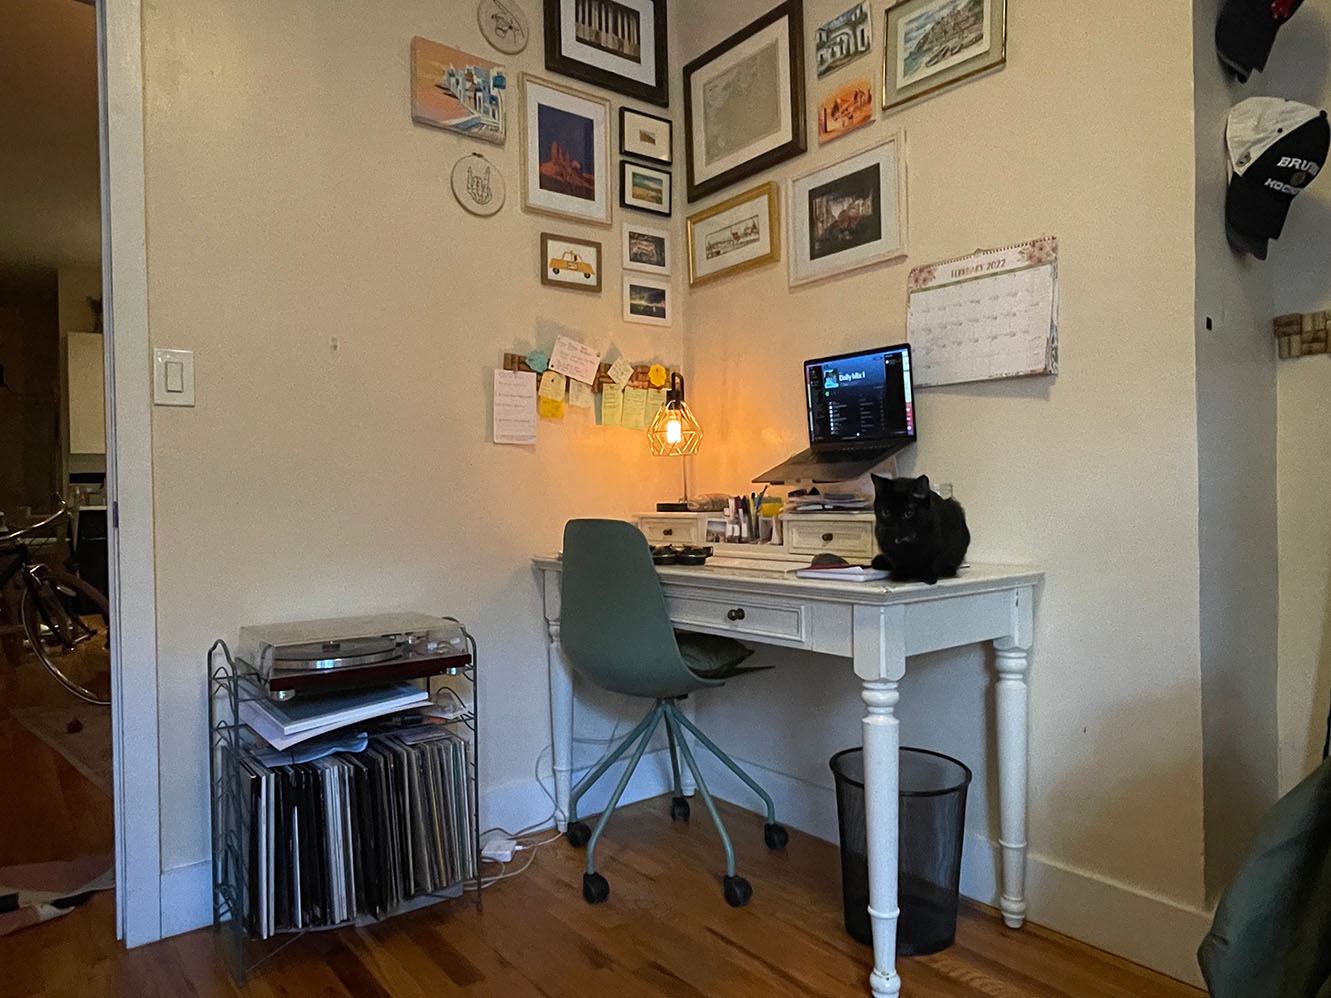 OnSIP employee's work-from-home desk space.